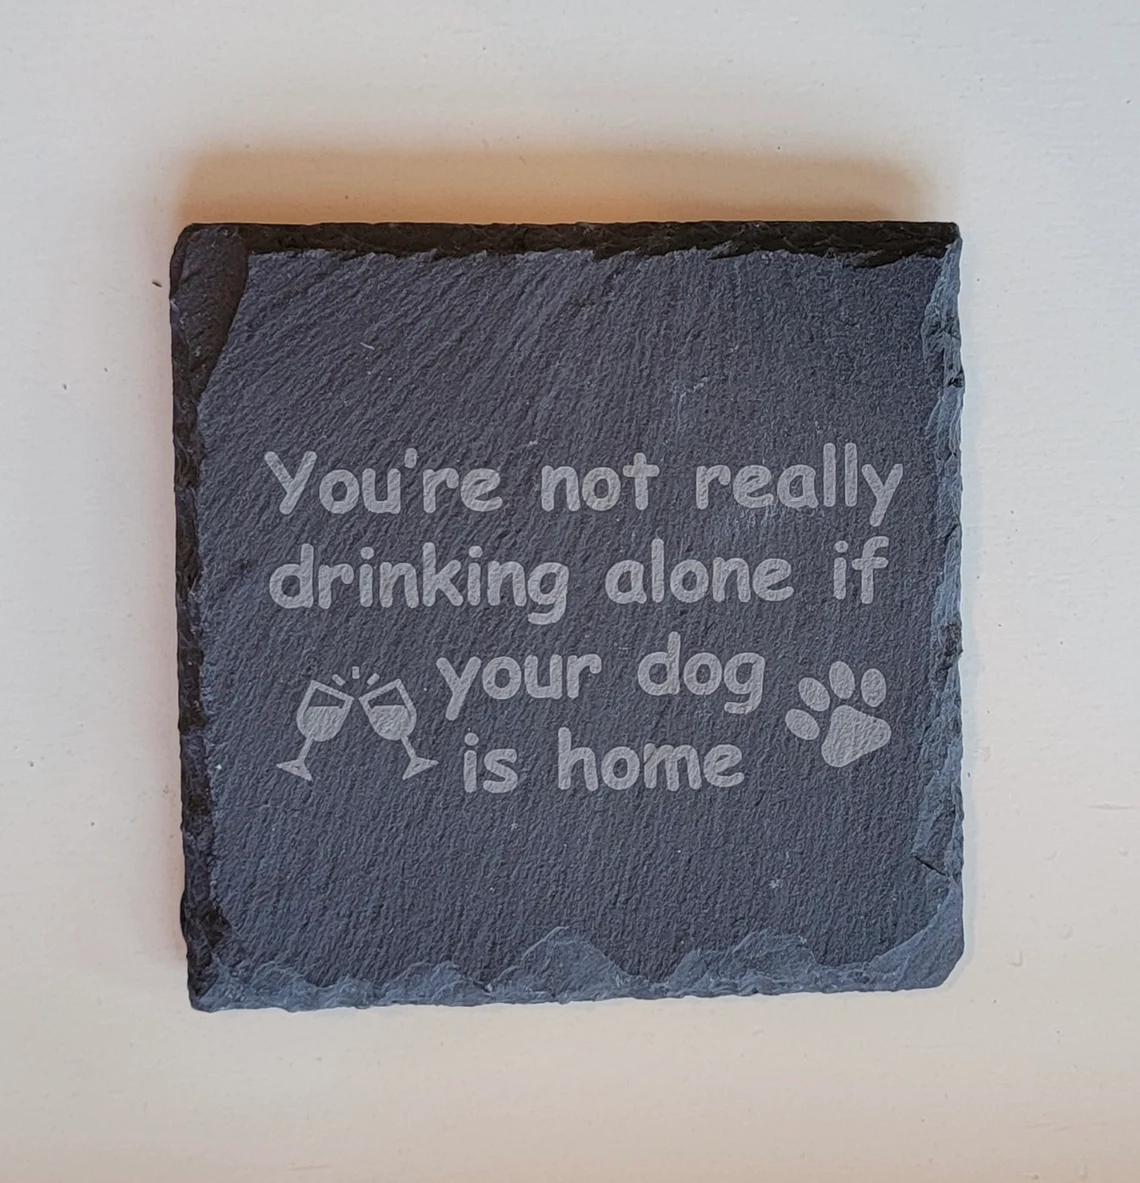 coaster saying "it's not drinking alone if the dog is home"